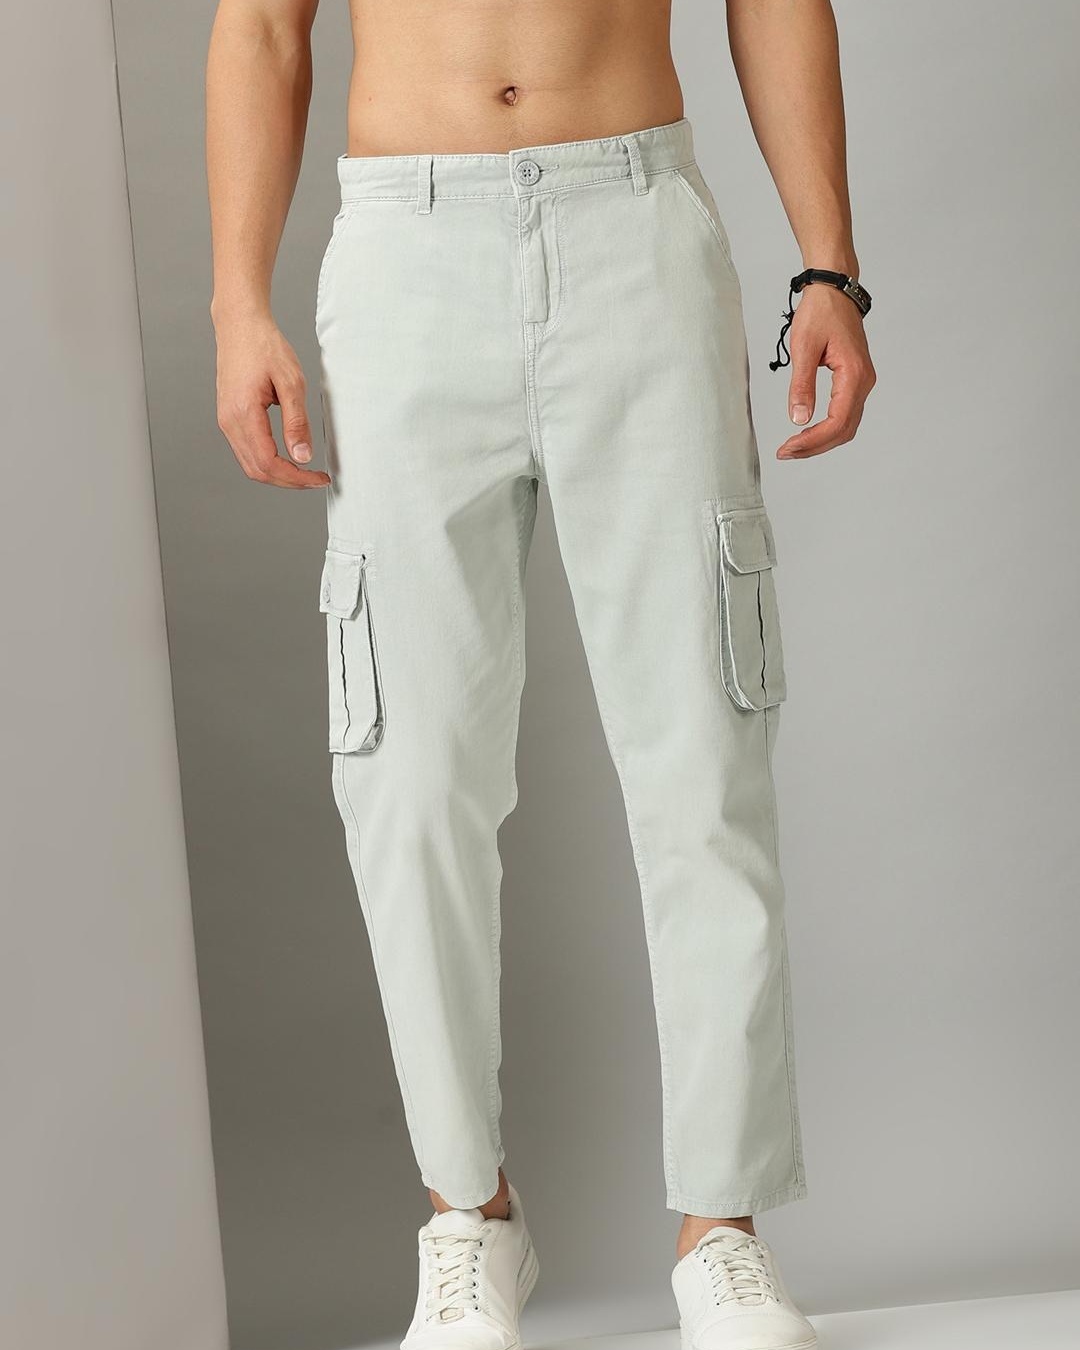 Regular Fit Cargo Trousers with 20% discount!